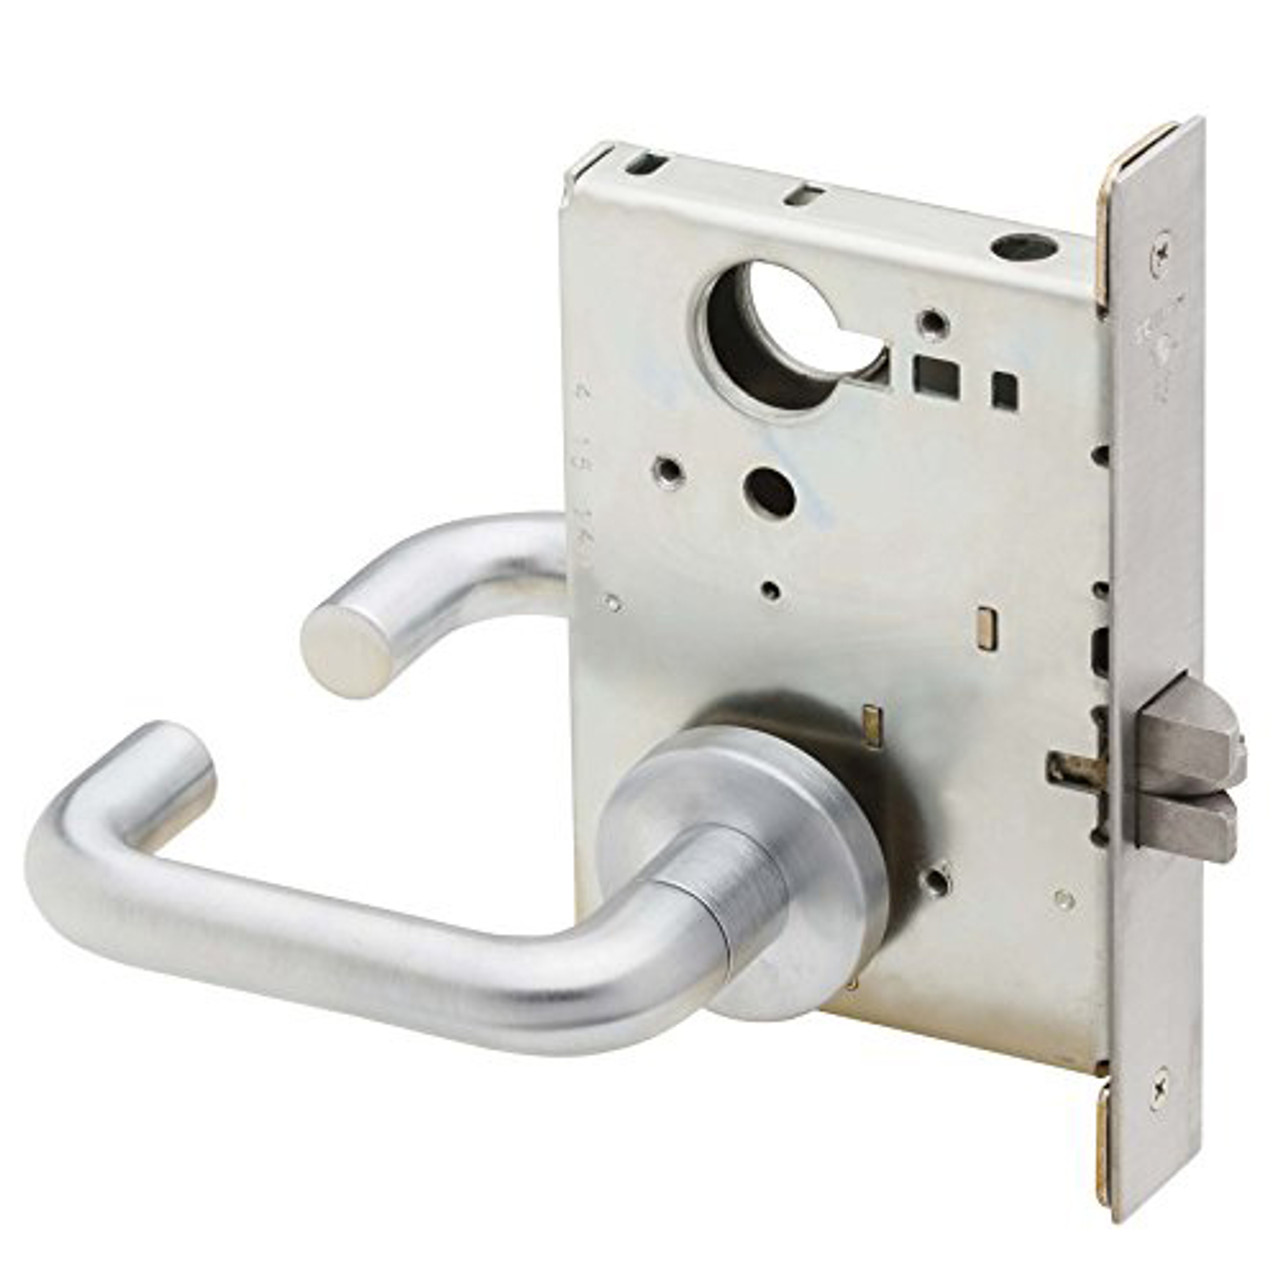 L9010-03B-629 Schlage L Series Passage Latch Commercial Mortise Lock with 03 Cast Lever Design in Bright Stainless Steel